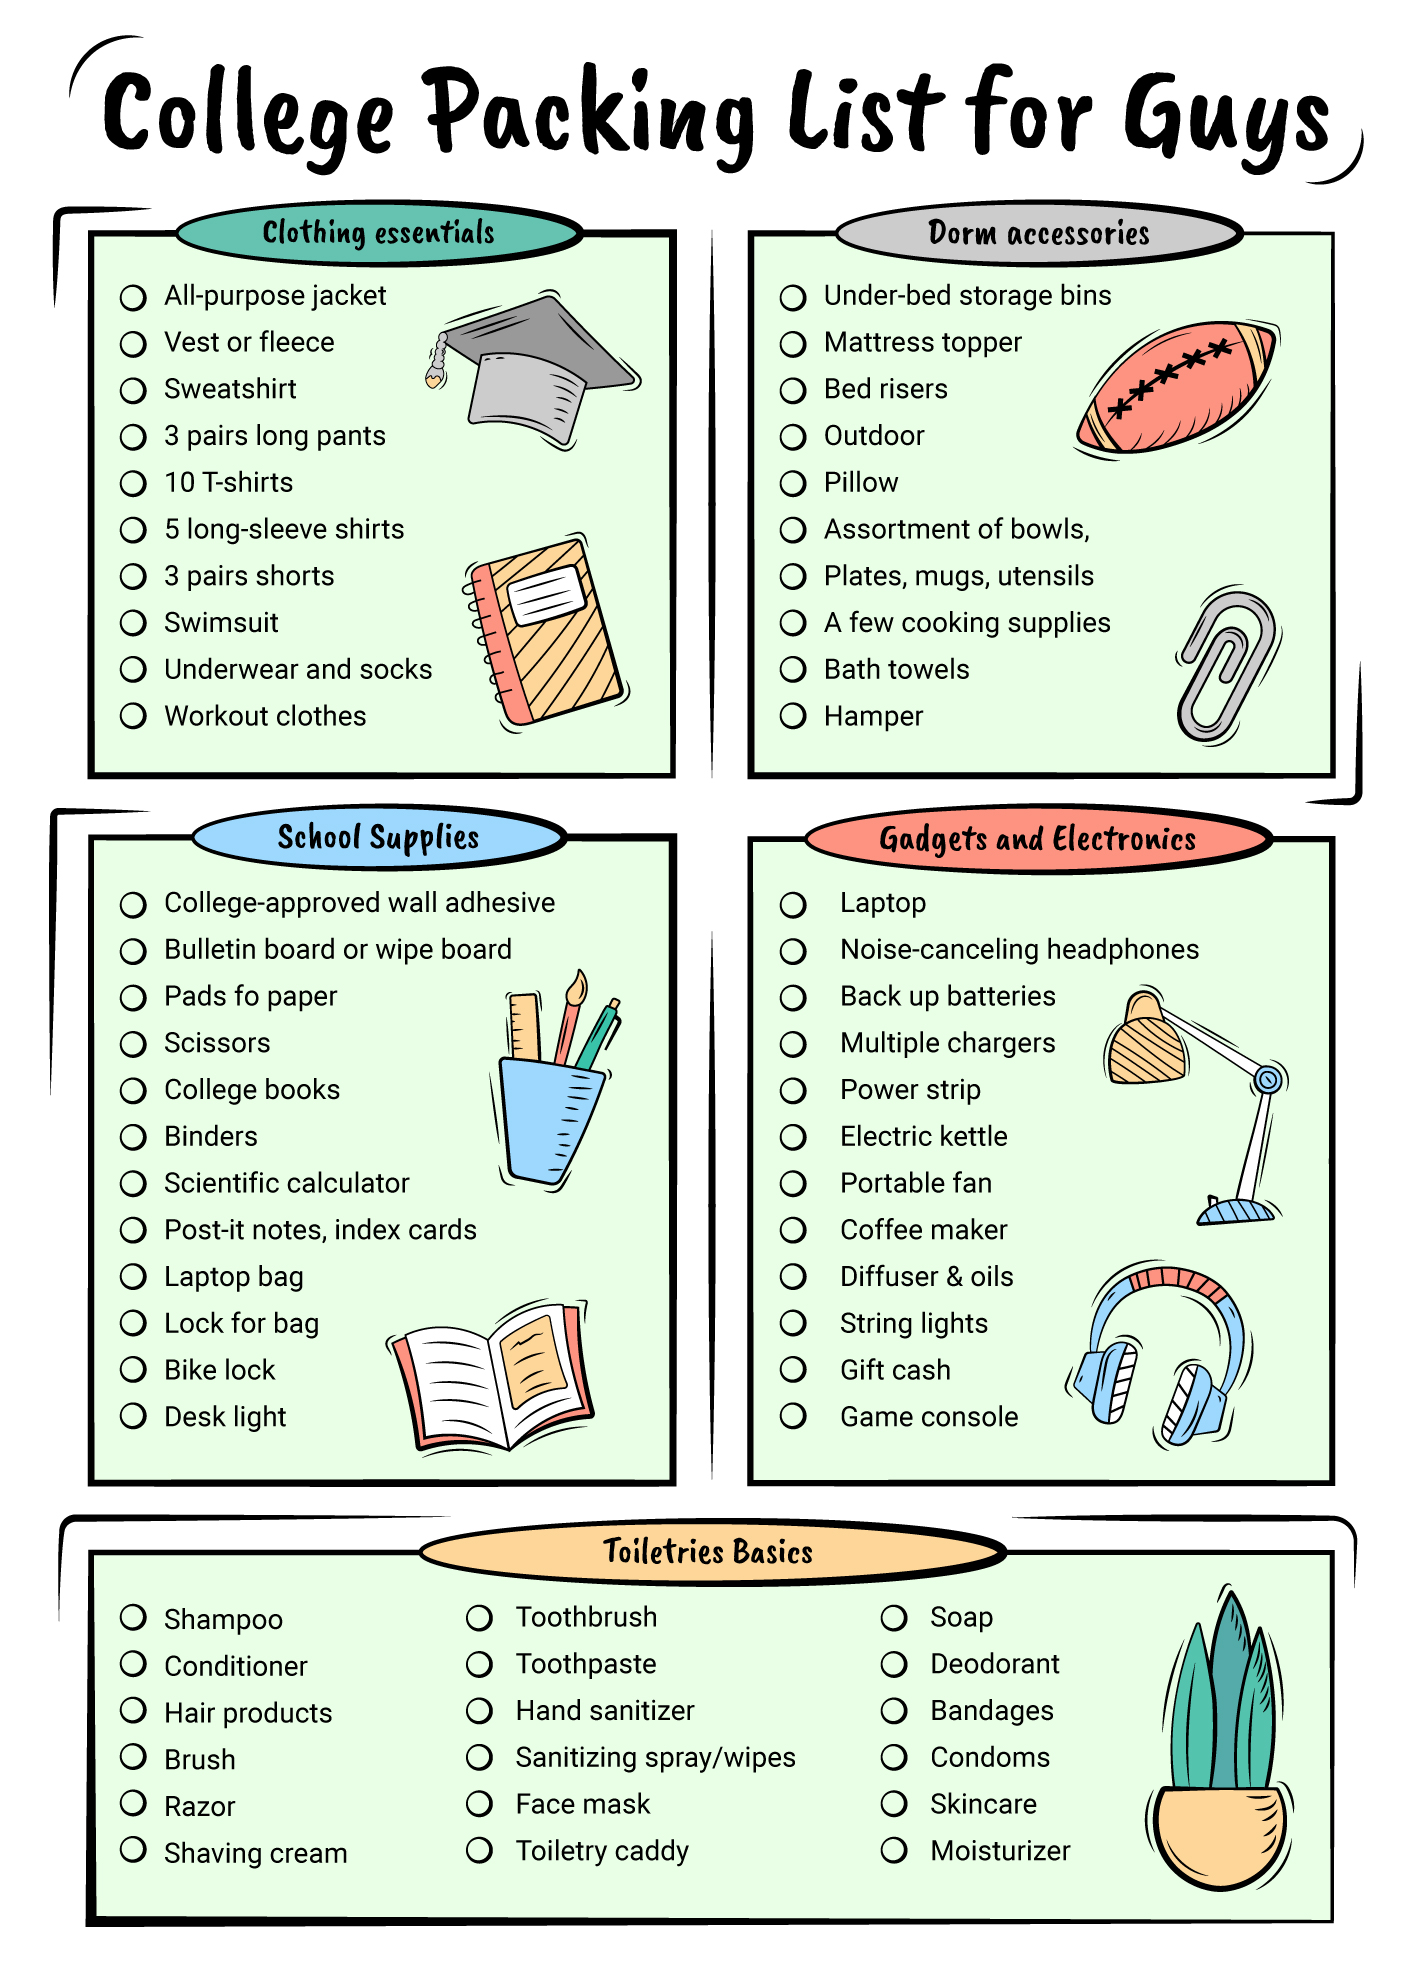 Basic Home Essentials Printable, Moving Out Checklist, New Apartment to Do  List, First House Packing Guide PDF, Room Furniture List Download 